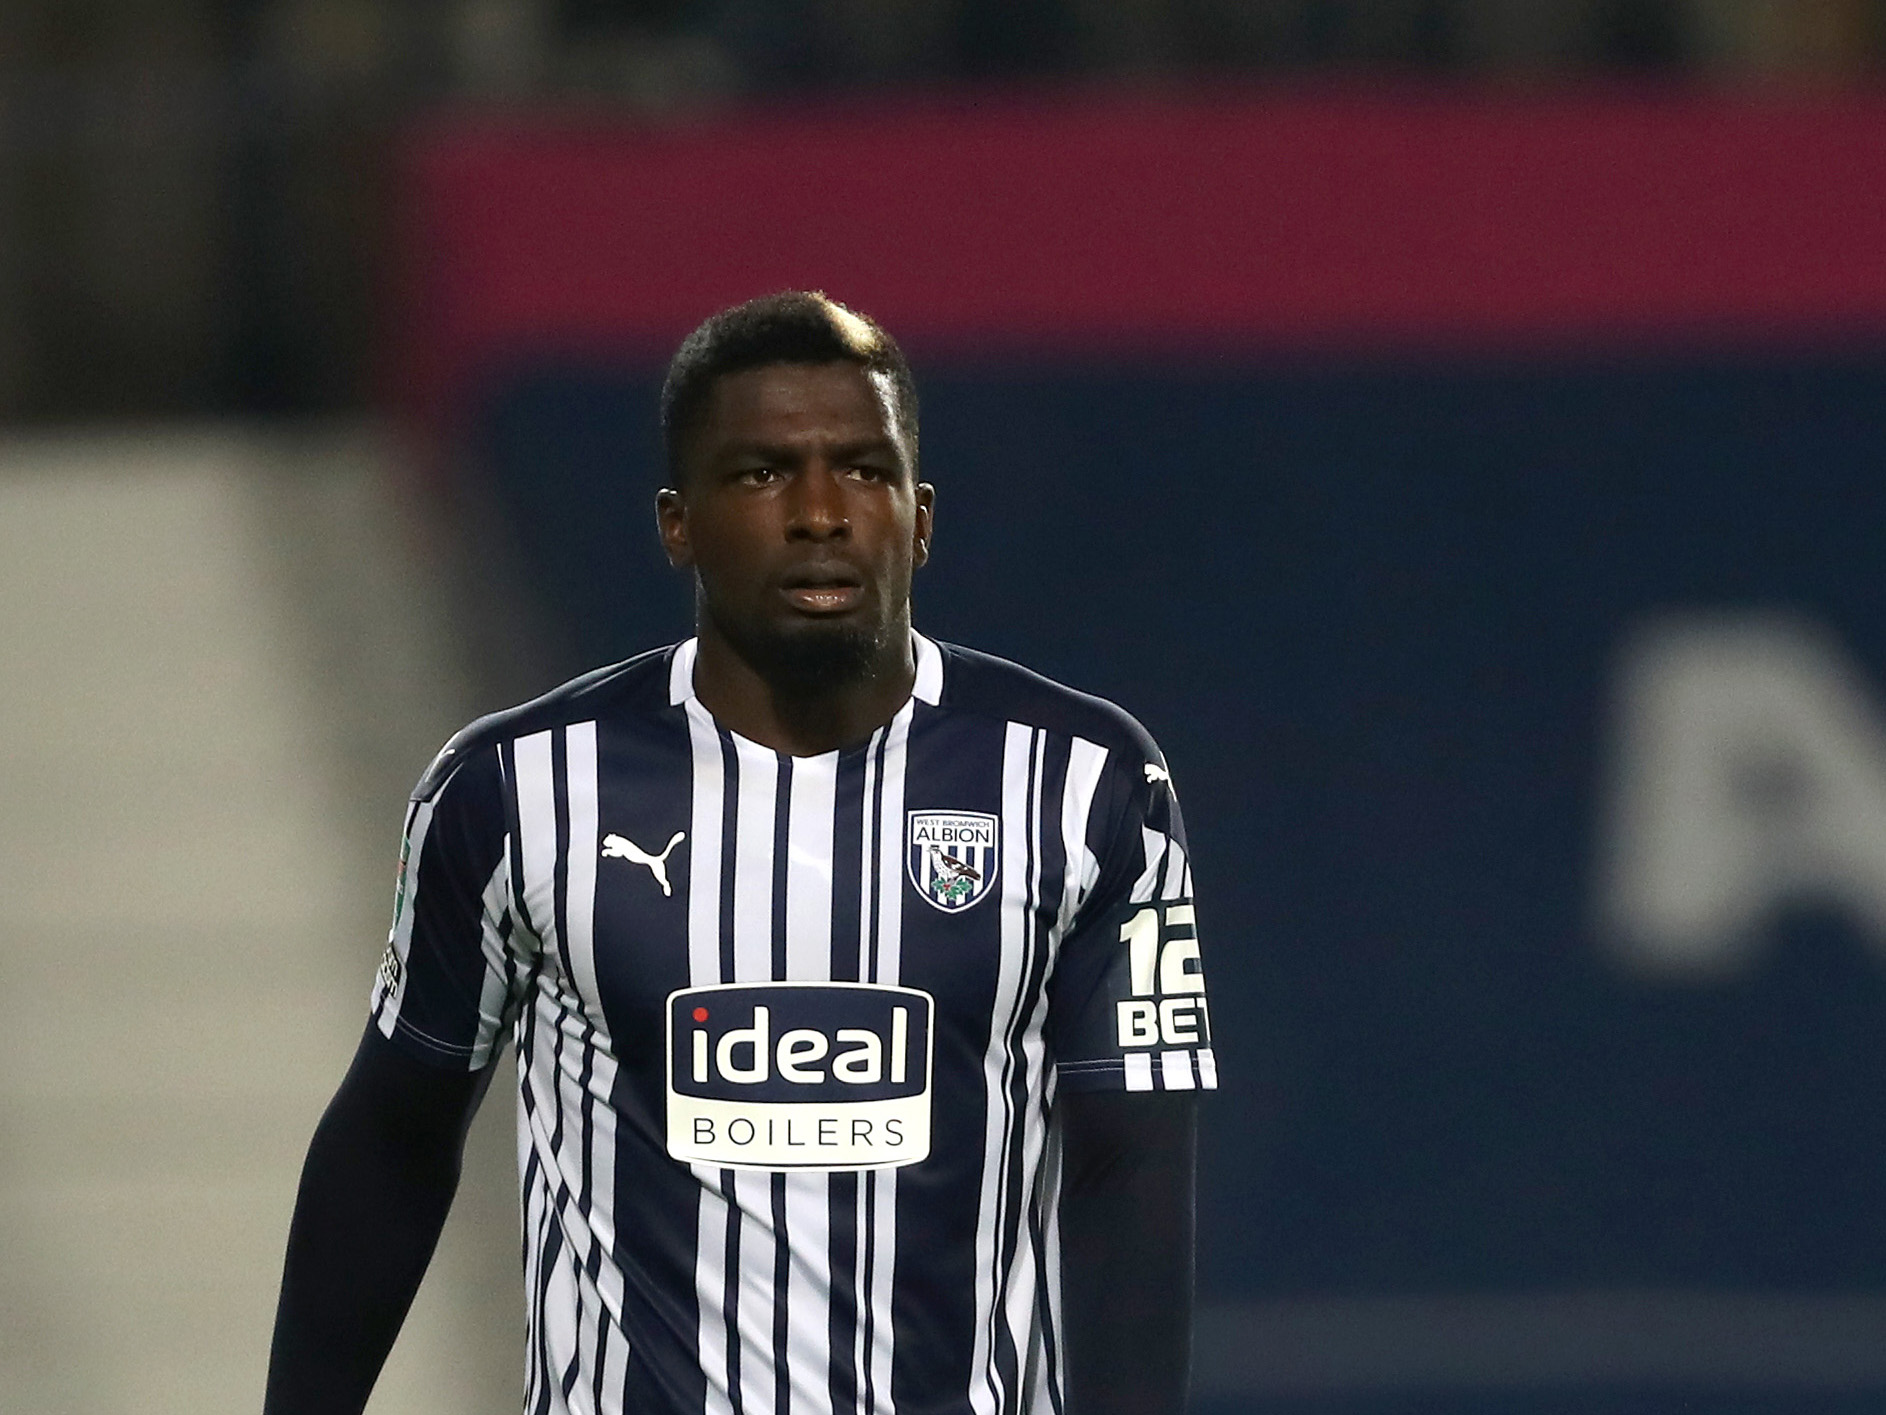 Kipre joins Charleroi on loan | West Bromwich Albion